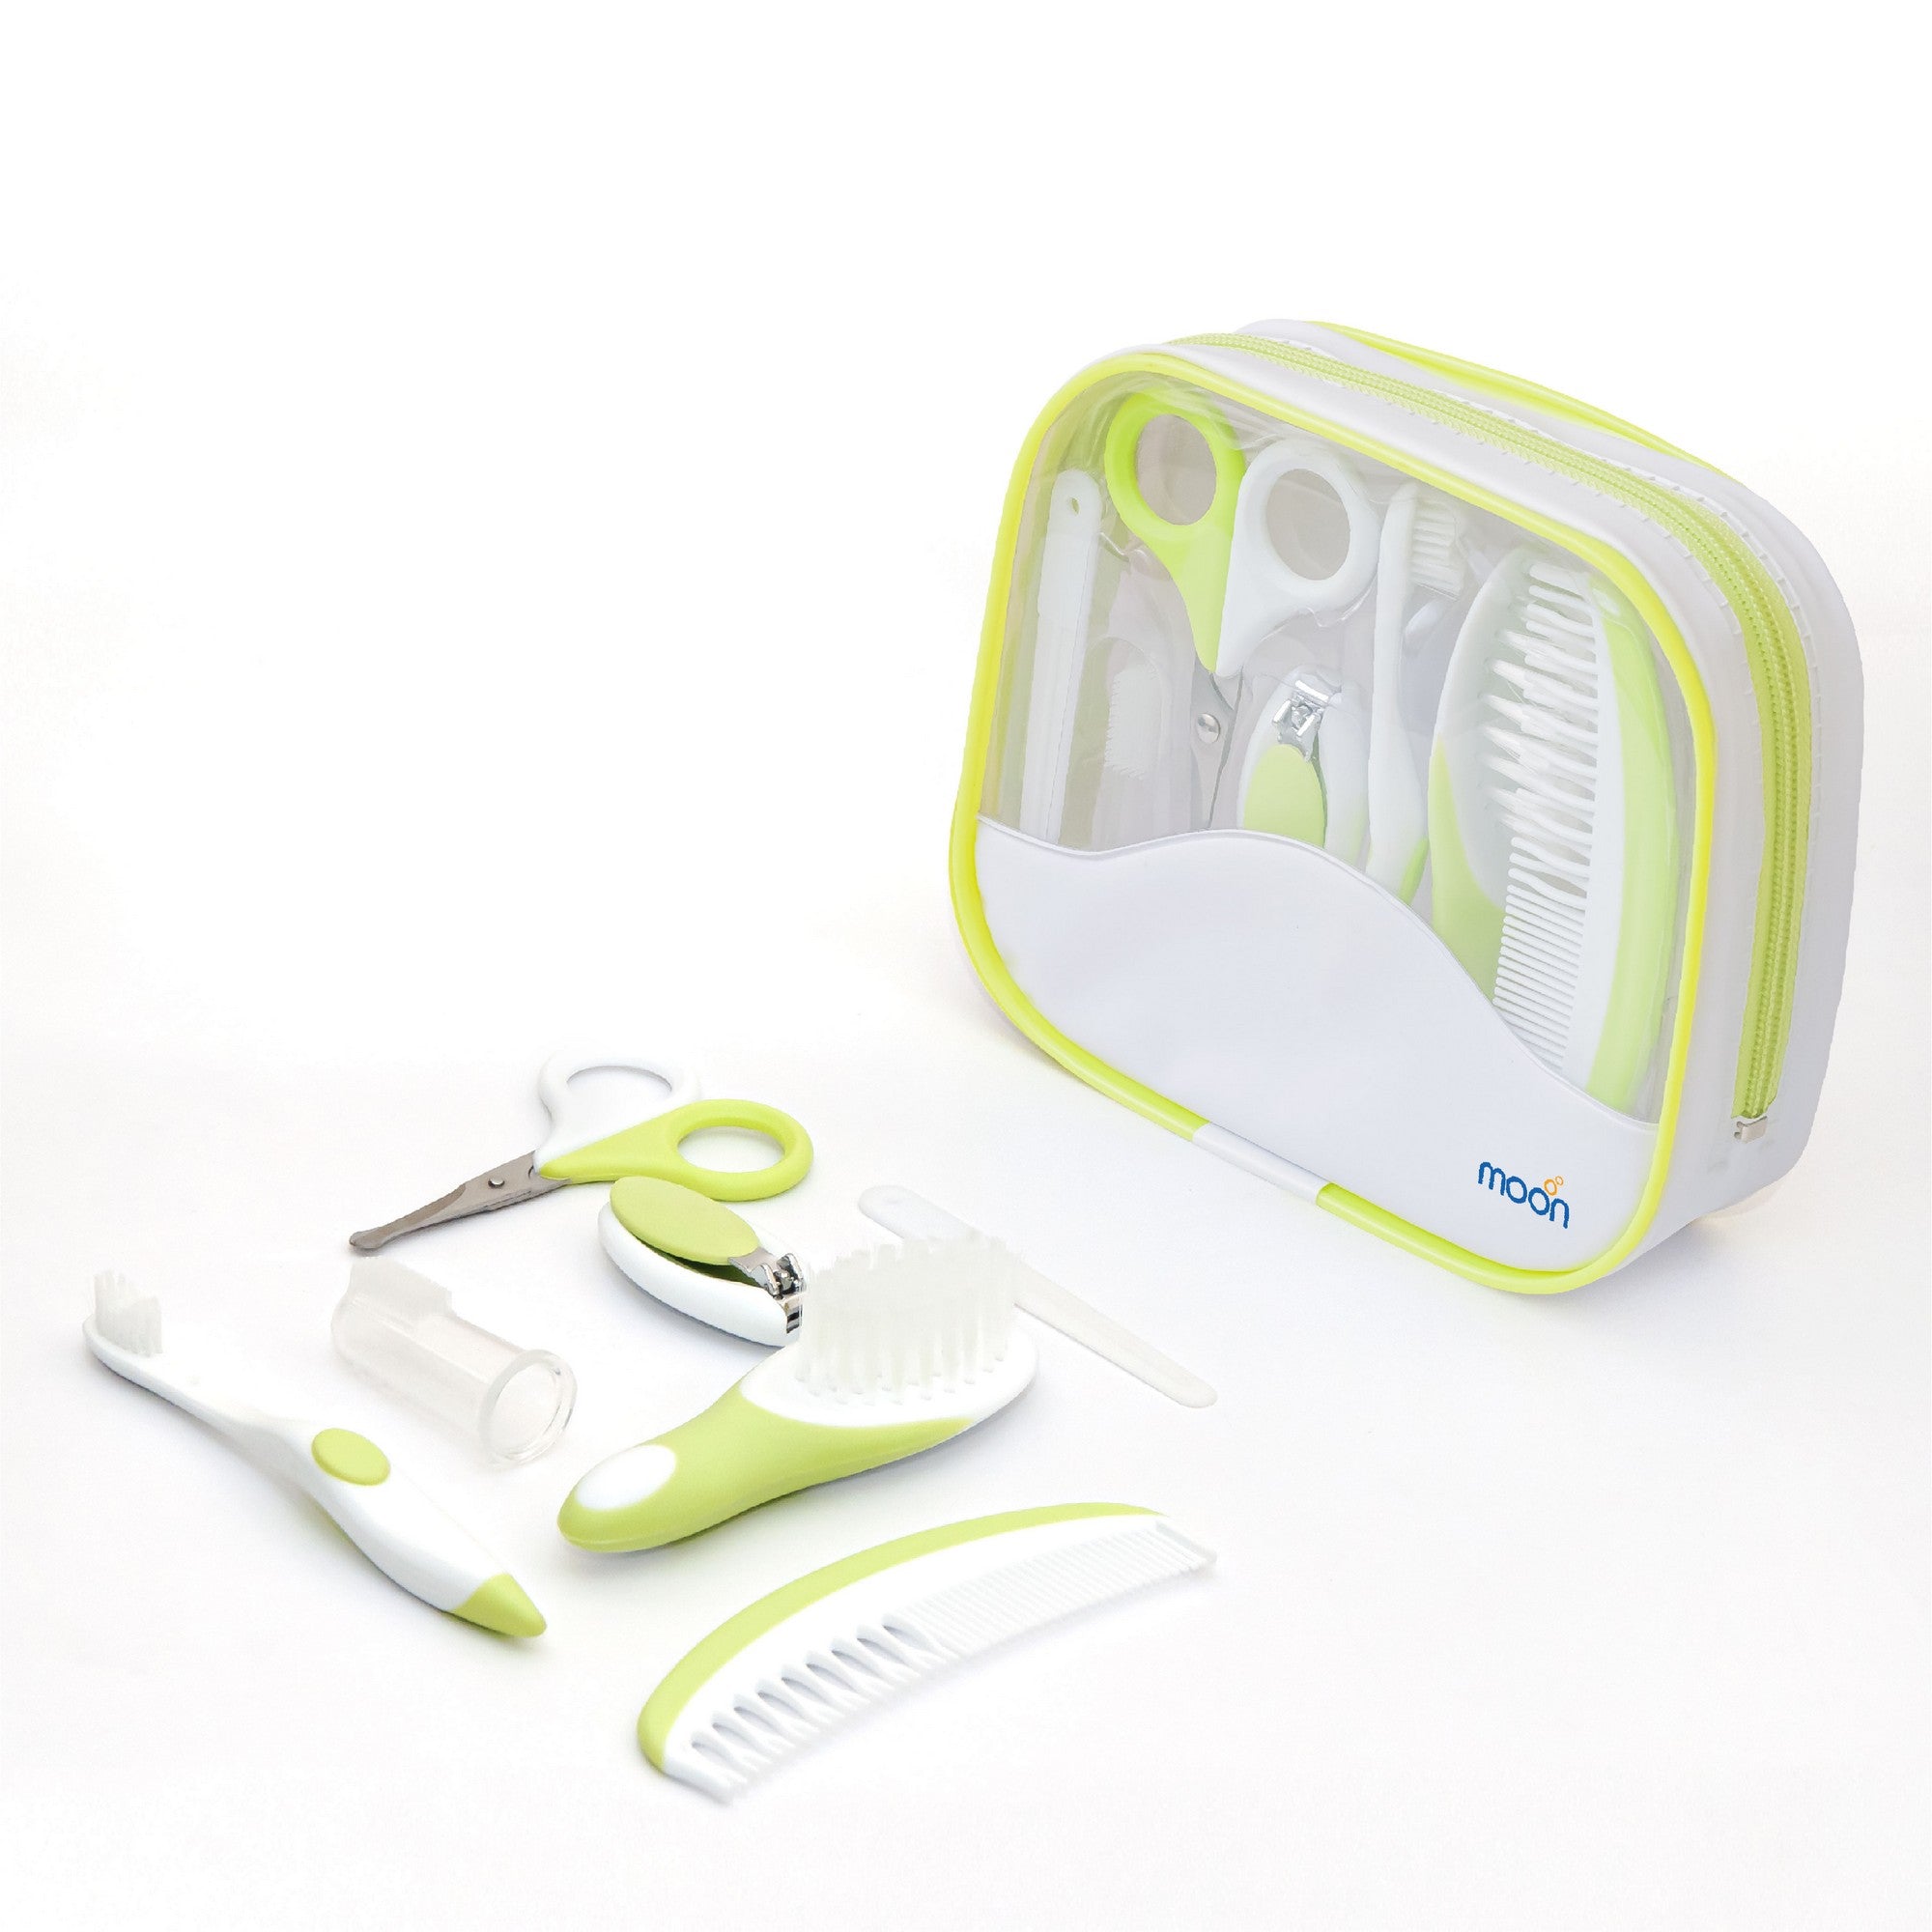 Moon Grooming Kit Grooming White & Green Birth to 24 Months